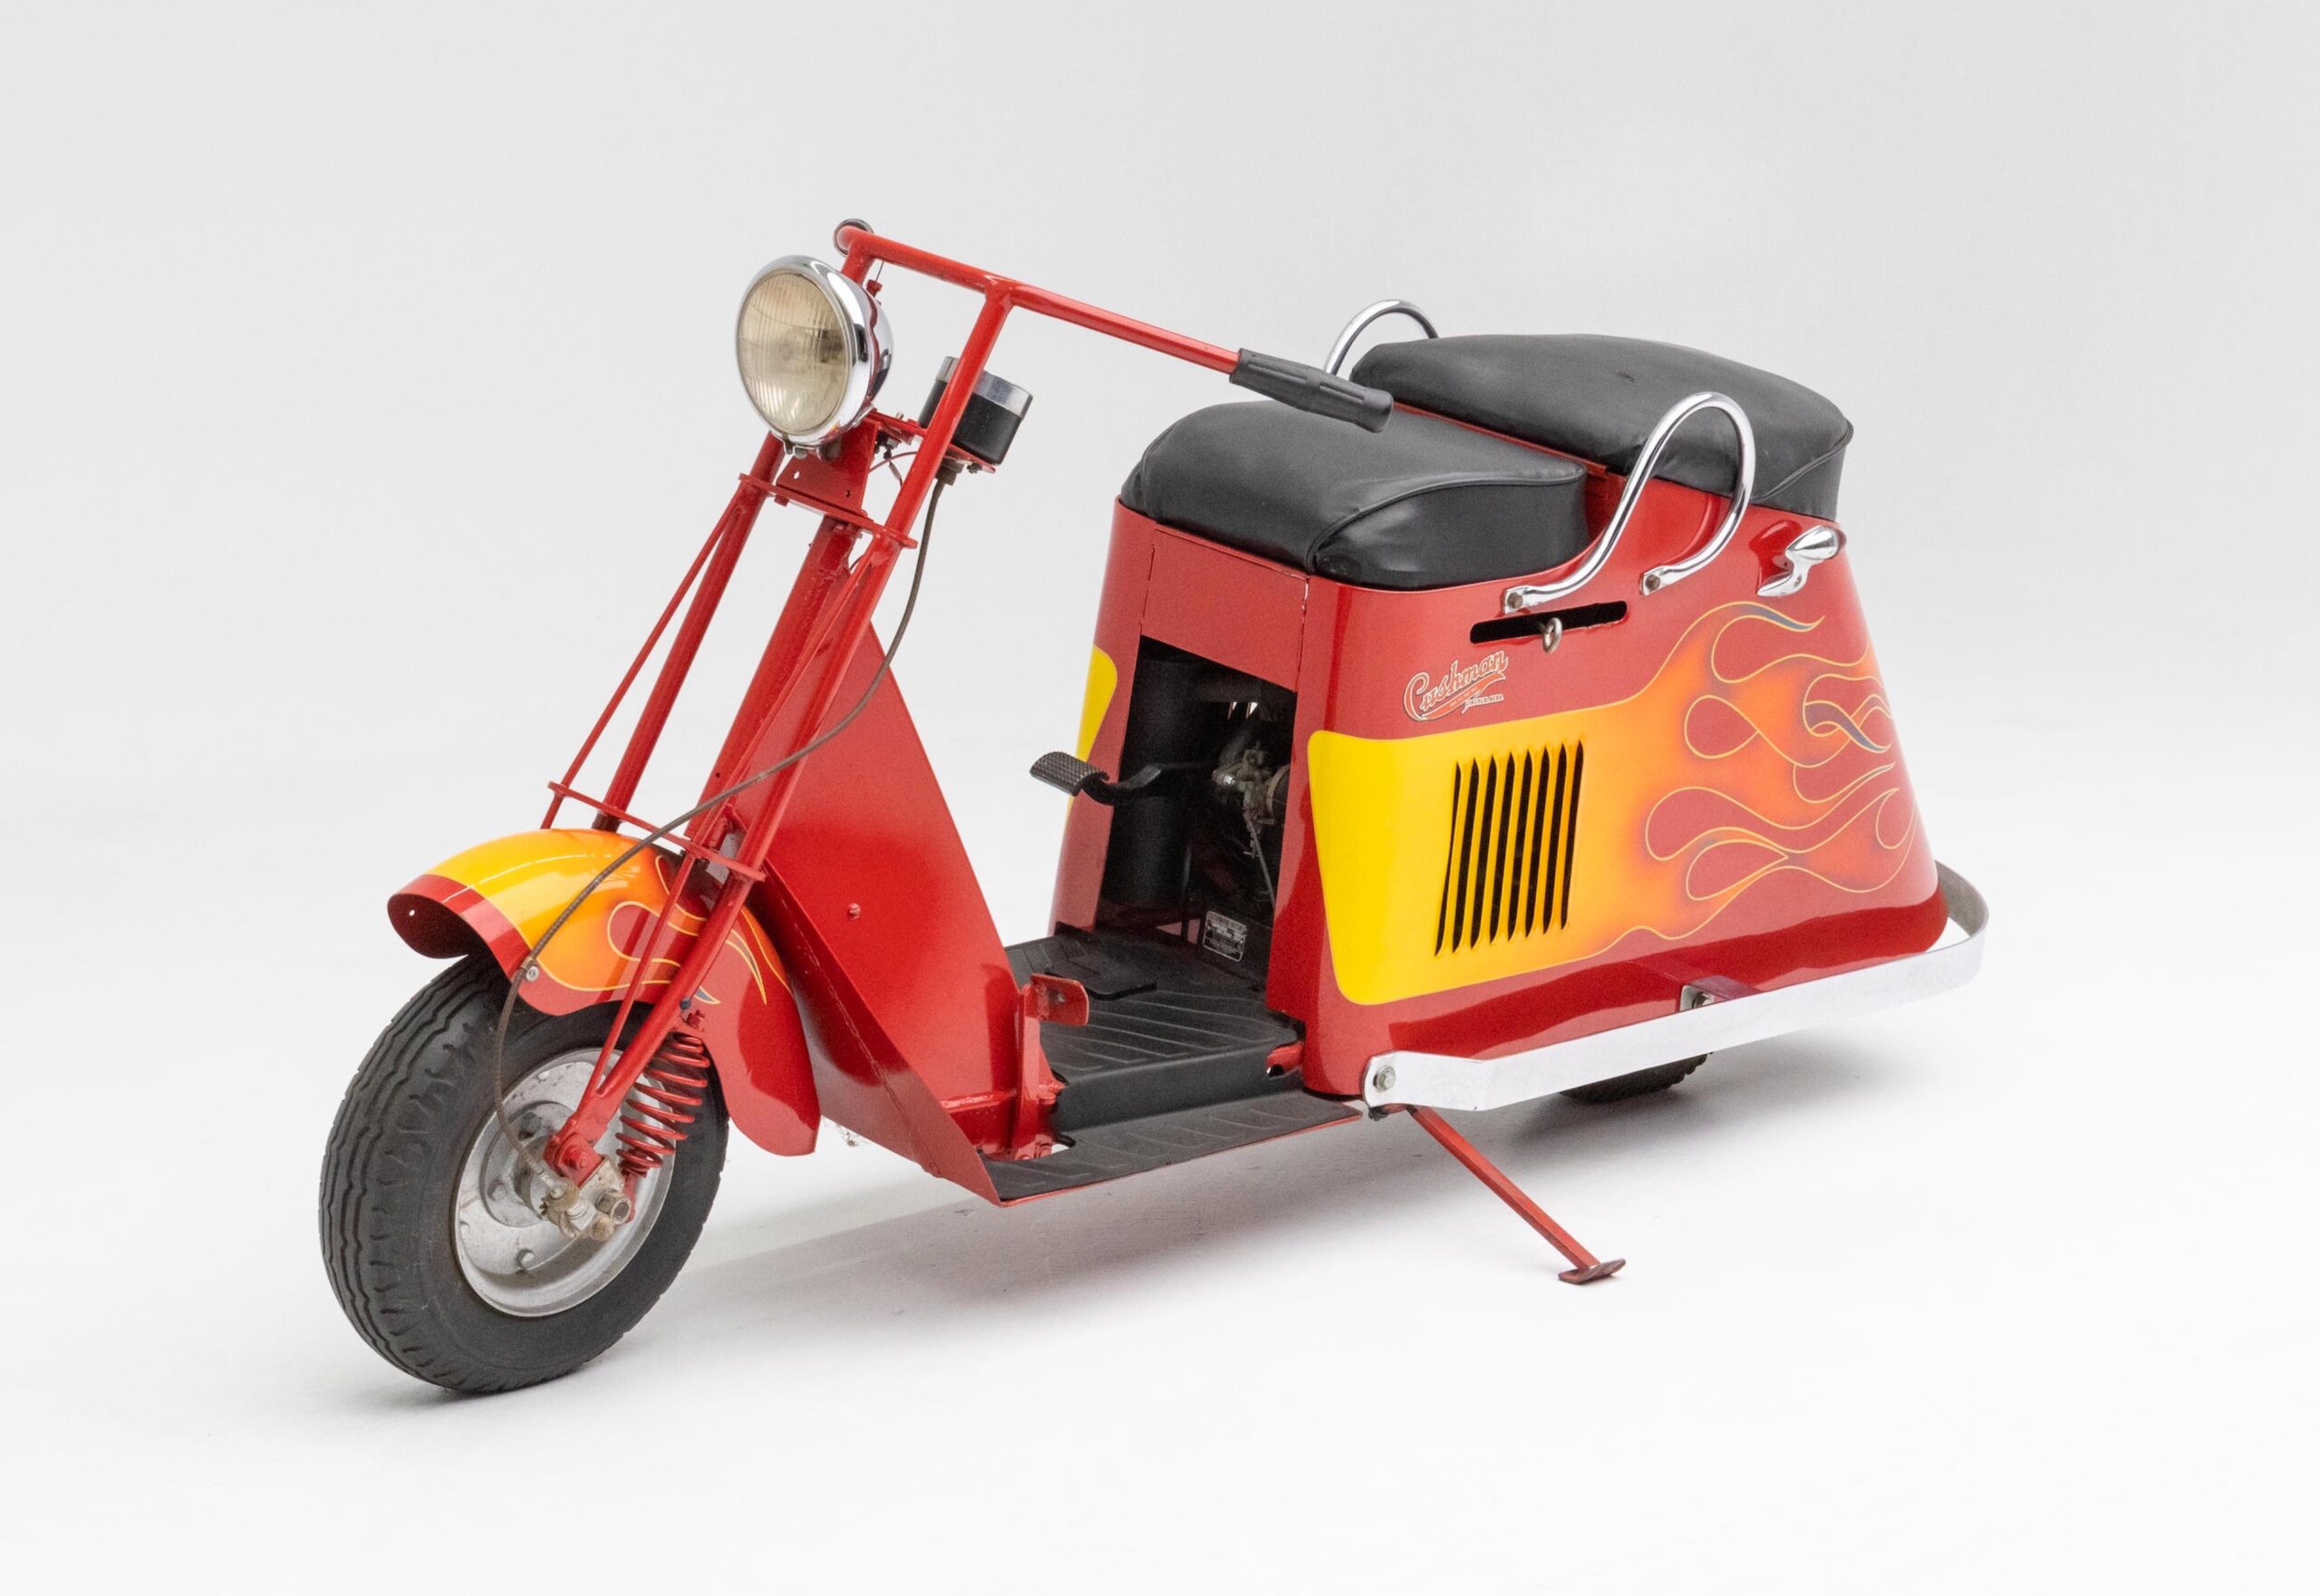 Advarsel kardinal Rejse The Cushman Series 60: America's Answer To The Vespa – $2,000 to $3,000 USD